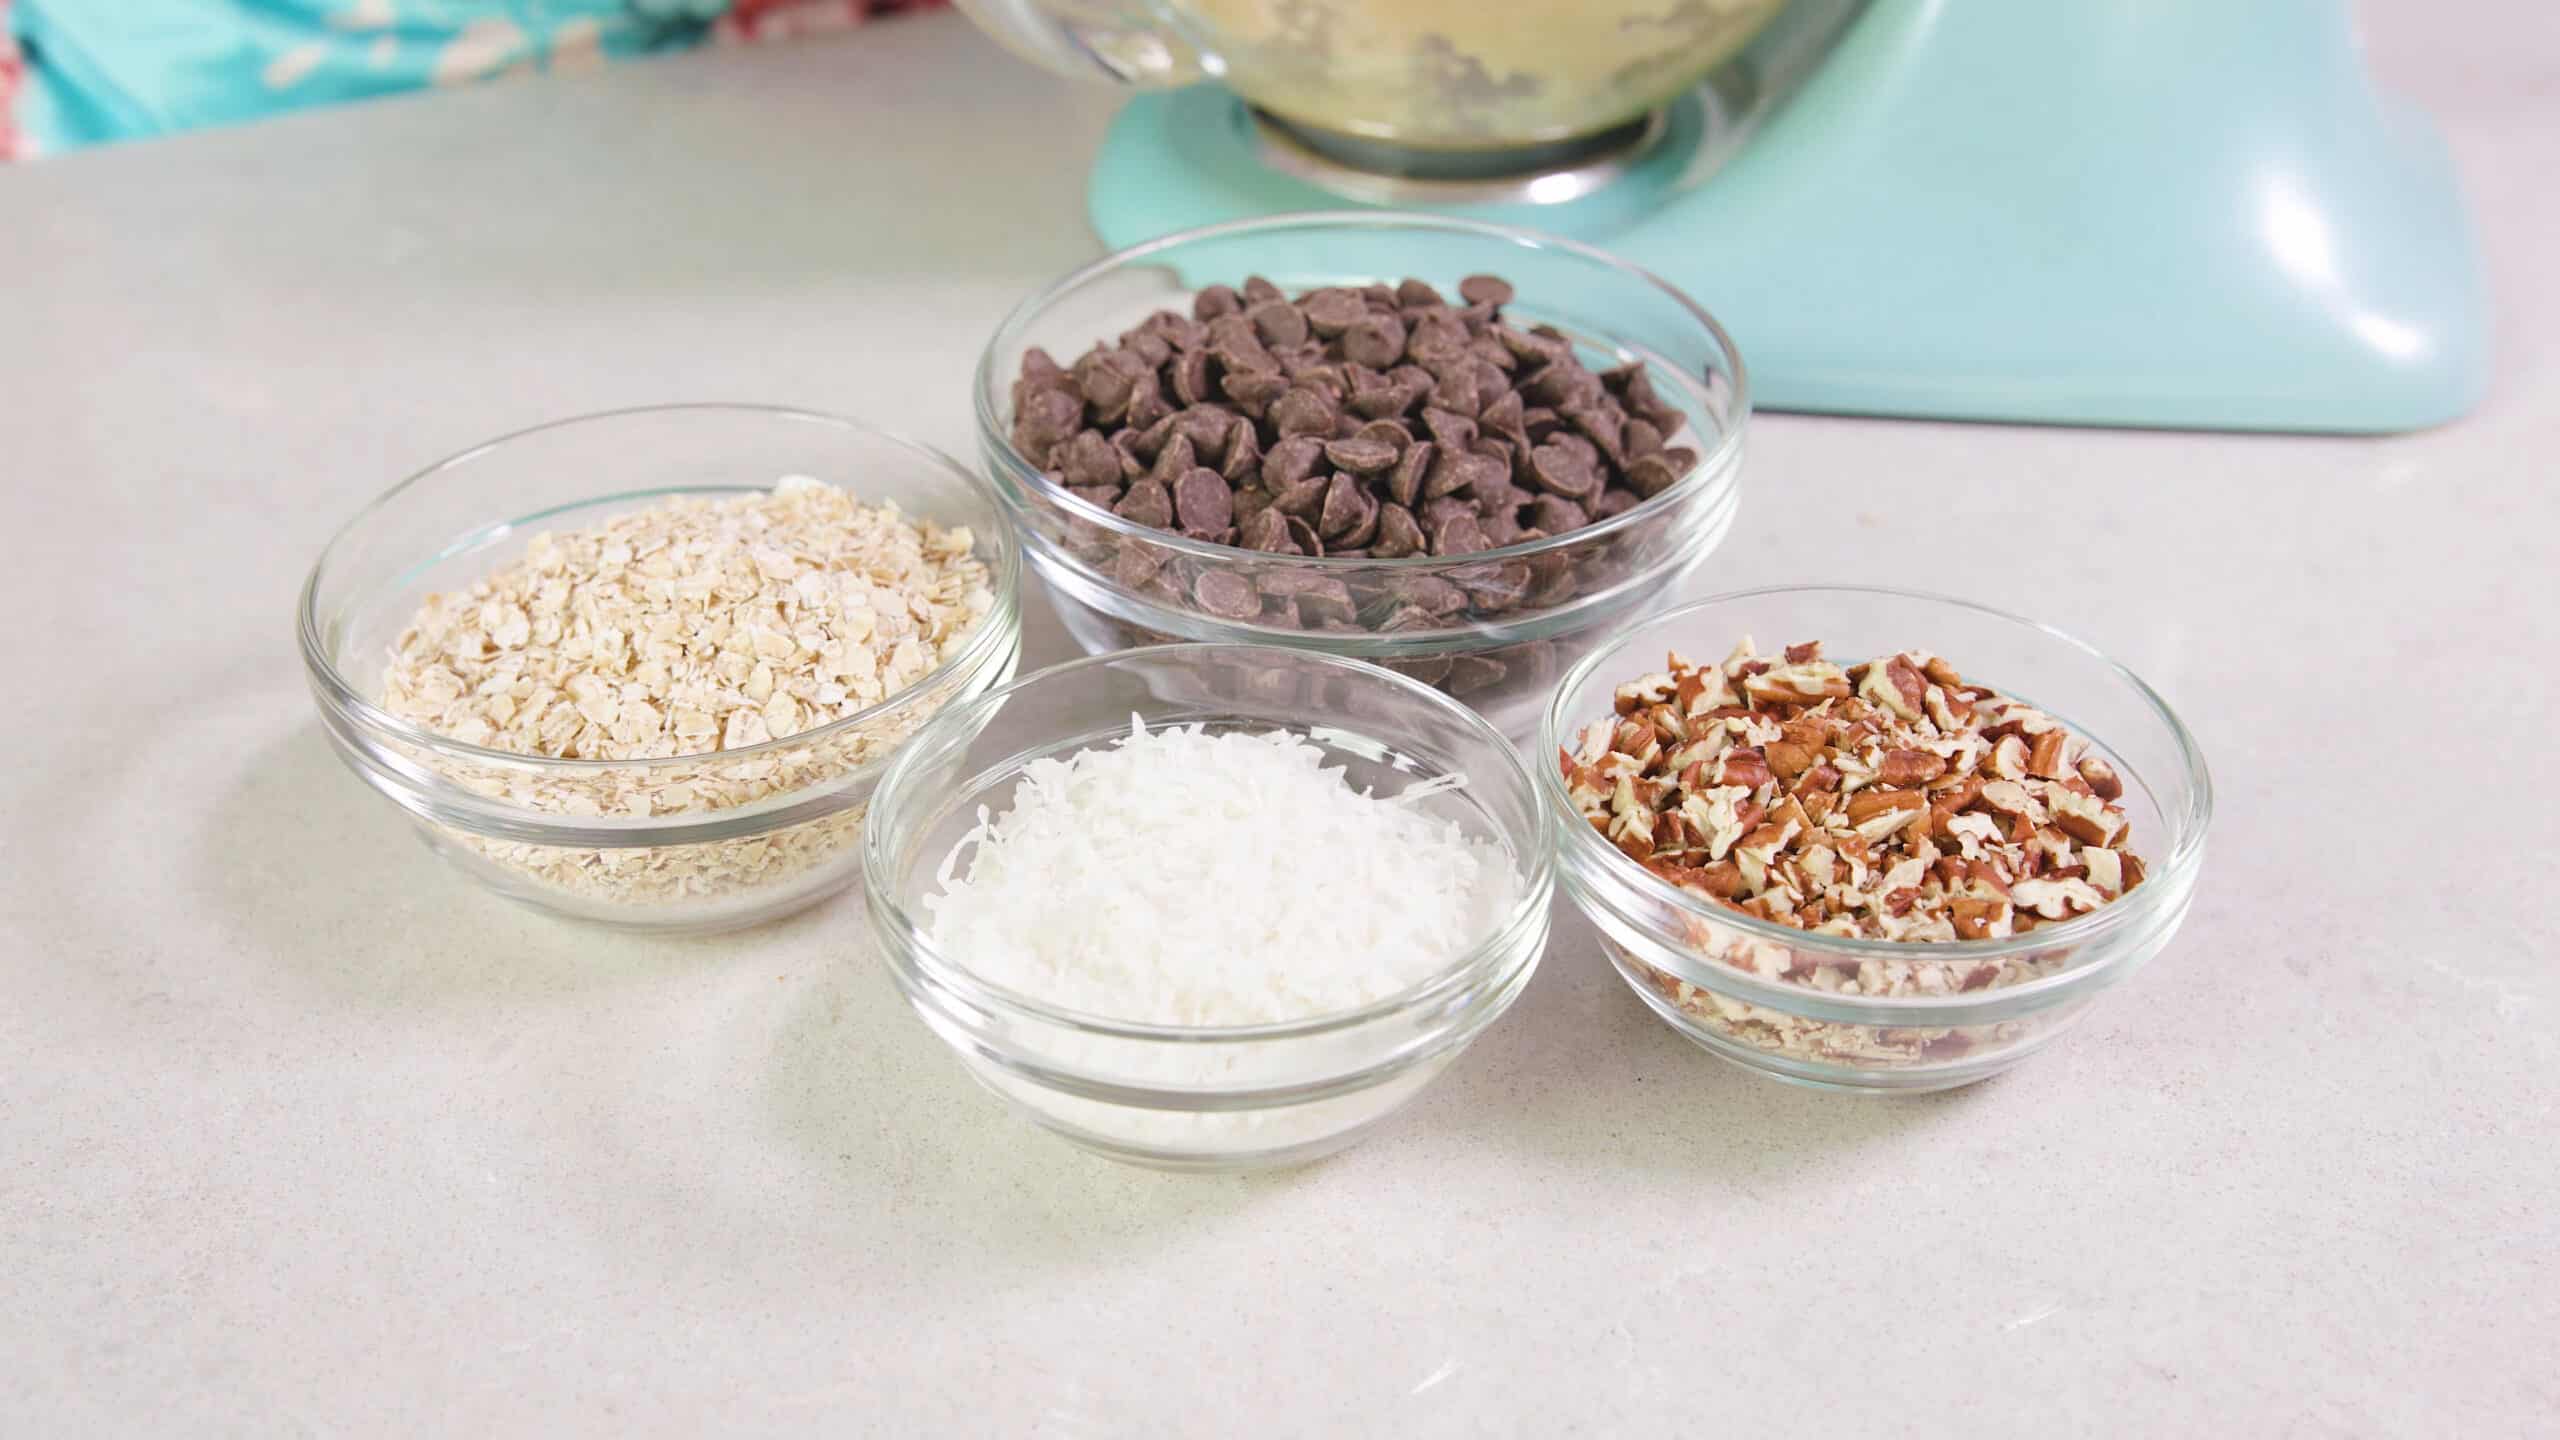 Angled view of small clear glass mixing bowls holding various ingredients to add to the cookie dough like dry oatmeal on the left, sweetened coconut, semisweet chocolate chips and chopped pecans.